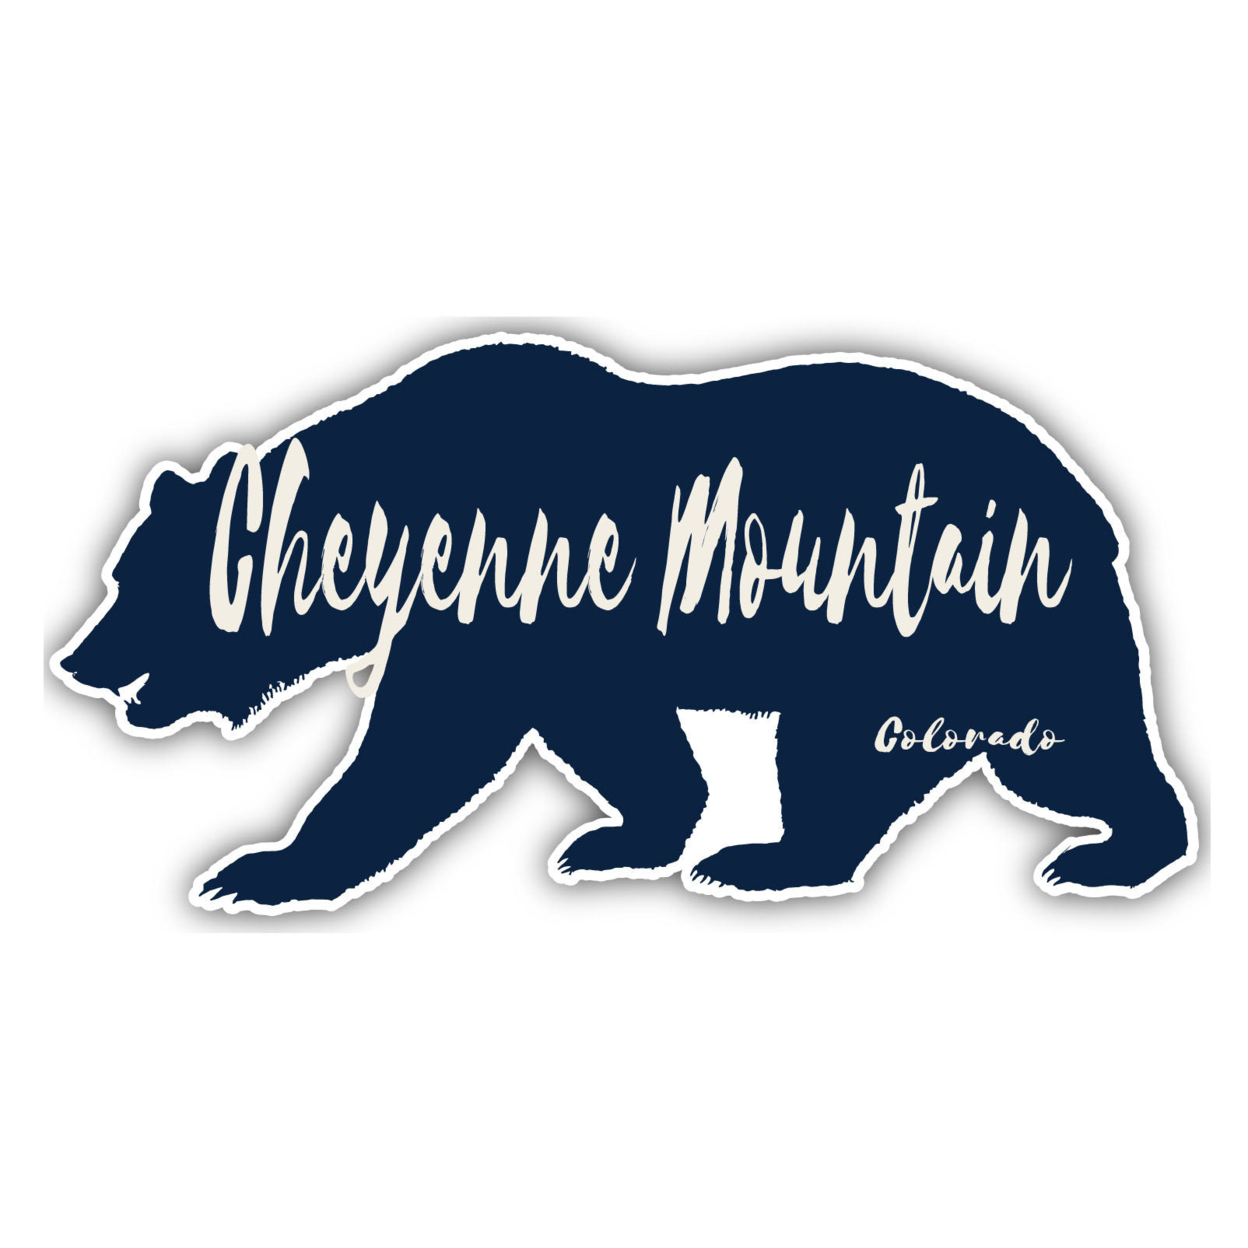 Cheyenne Mountain Colorado Souvenir Decorative Stickers (Choose Theme And Size) - 4-Pack, 8-Inch, Tent